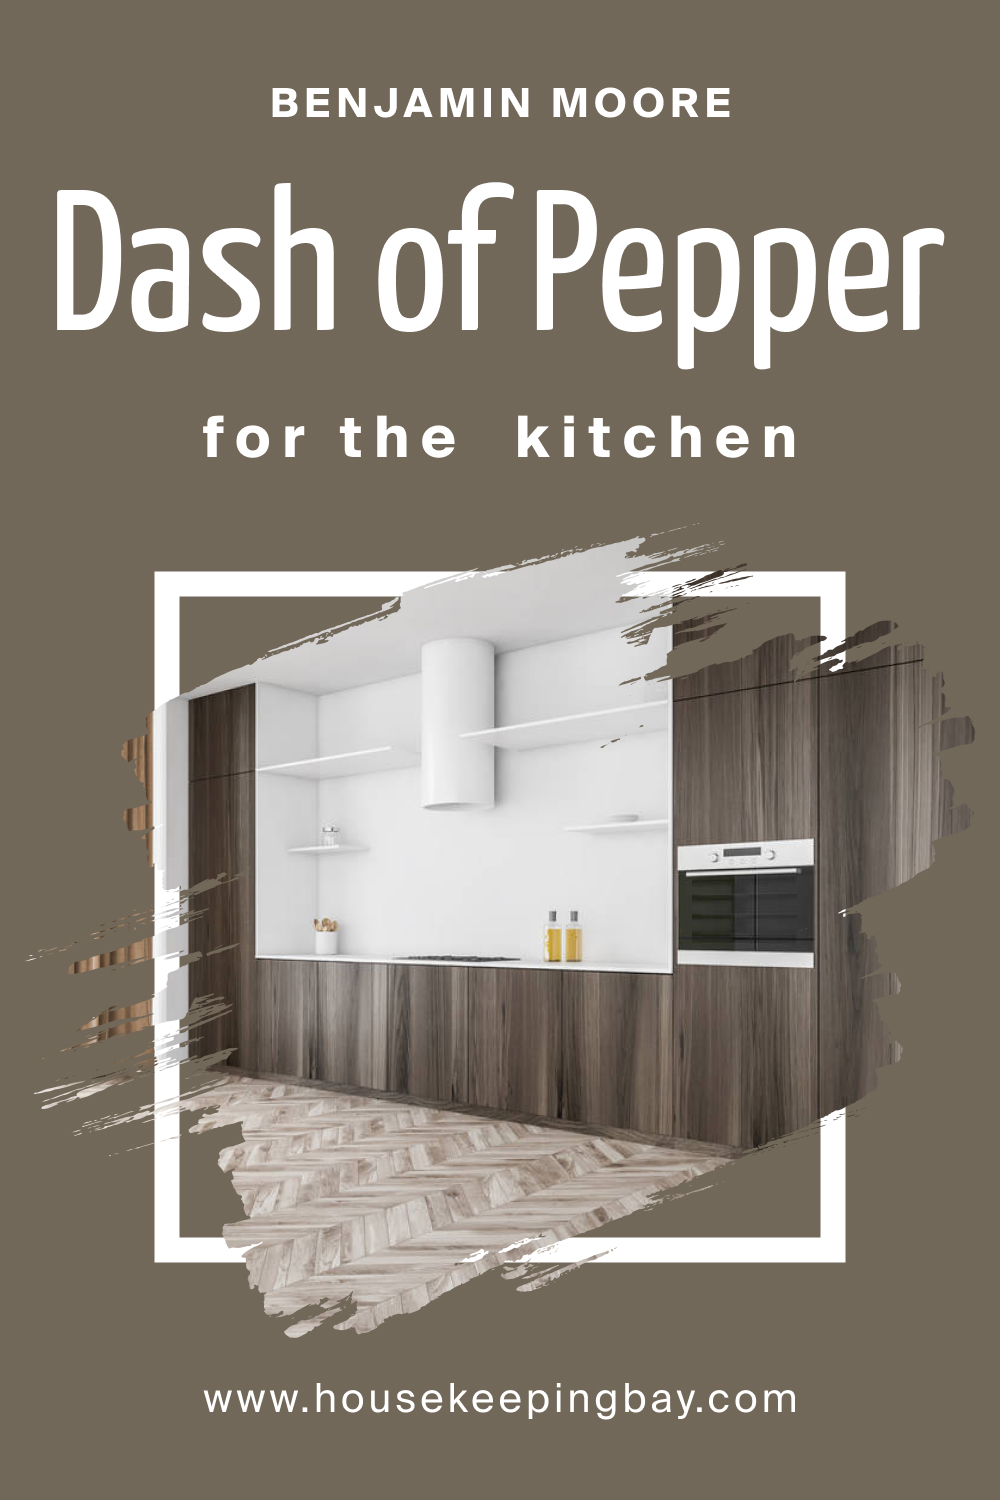 How to Use BM Dash of Pepper 1554 in the Kitchen?